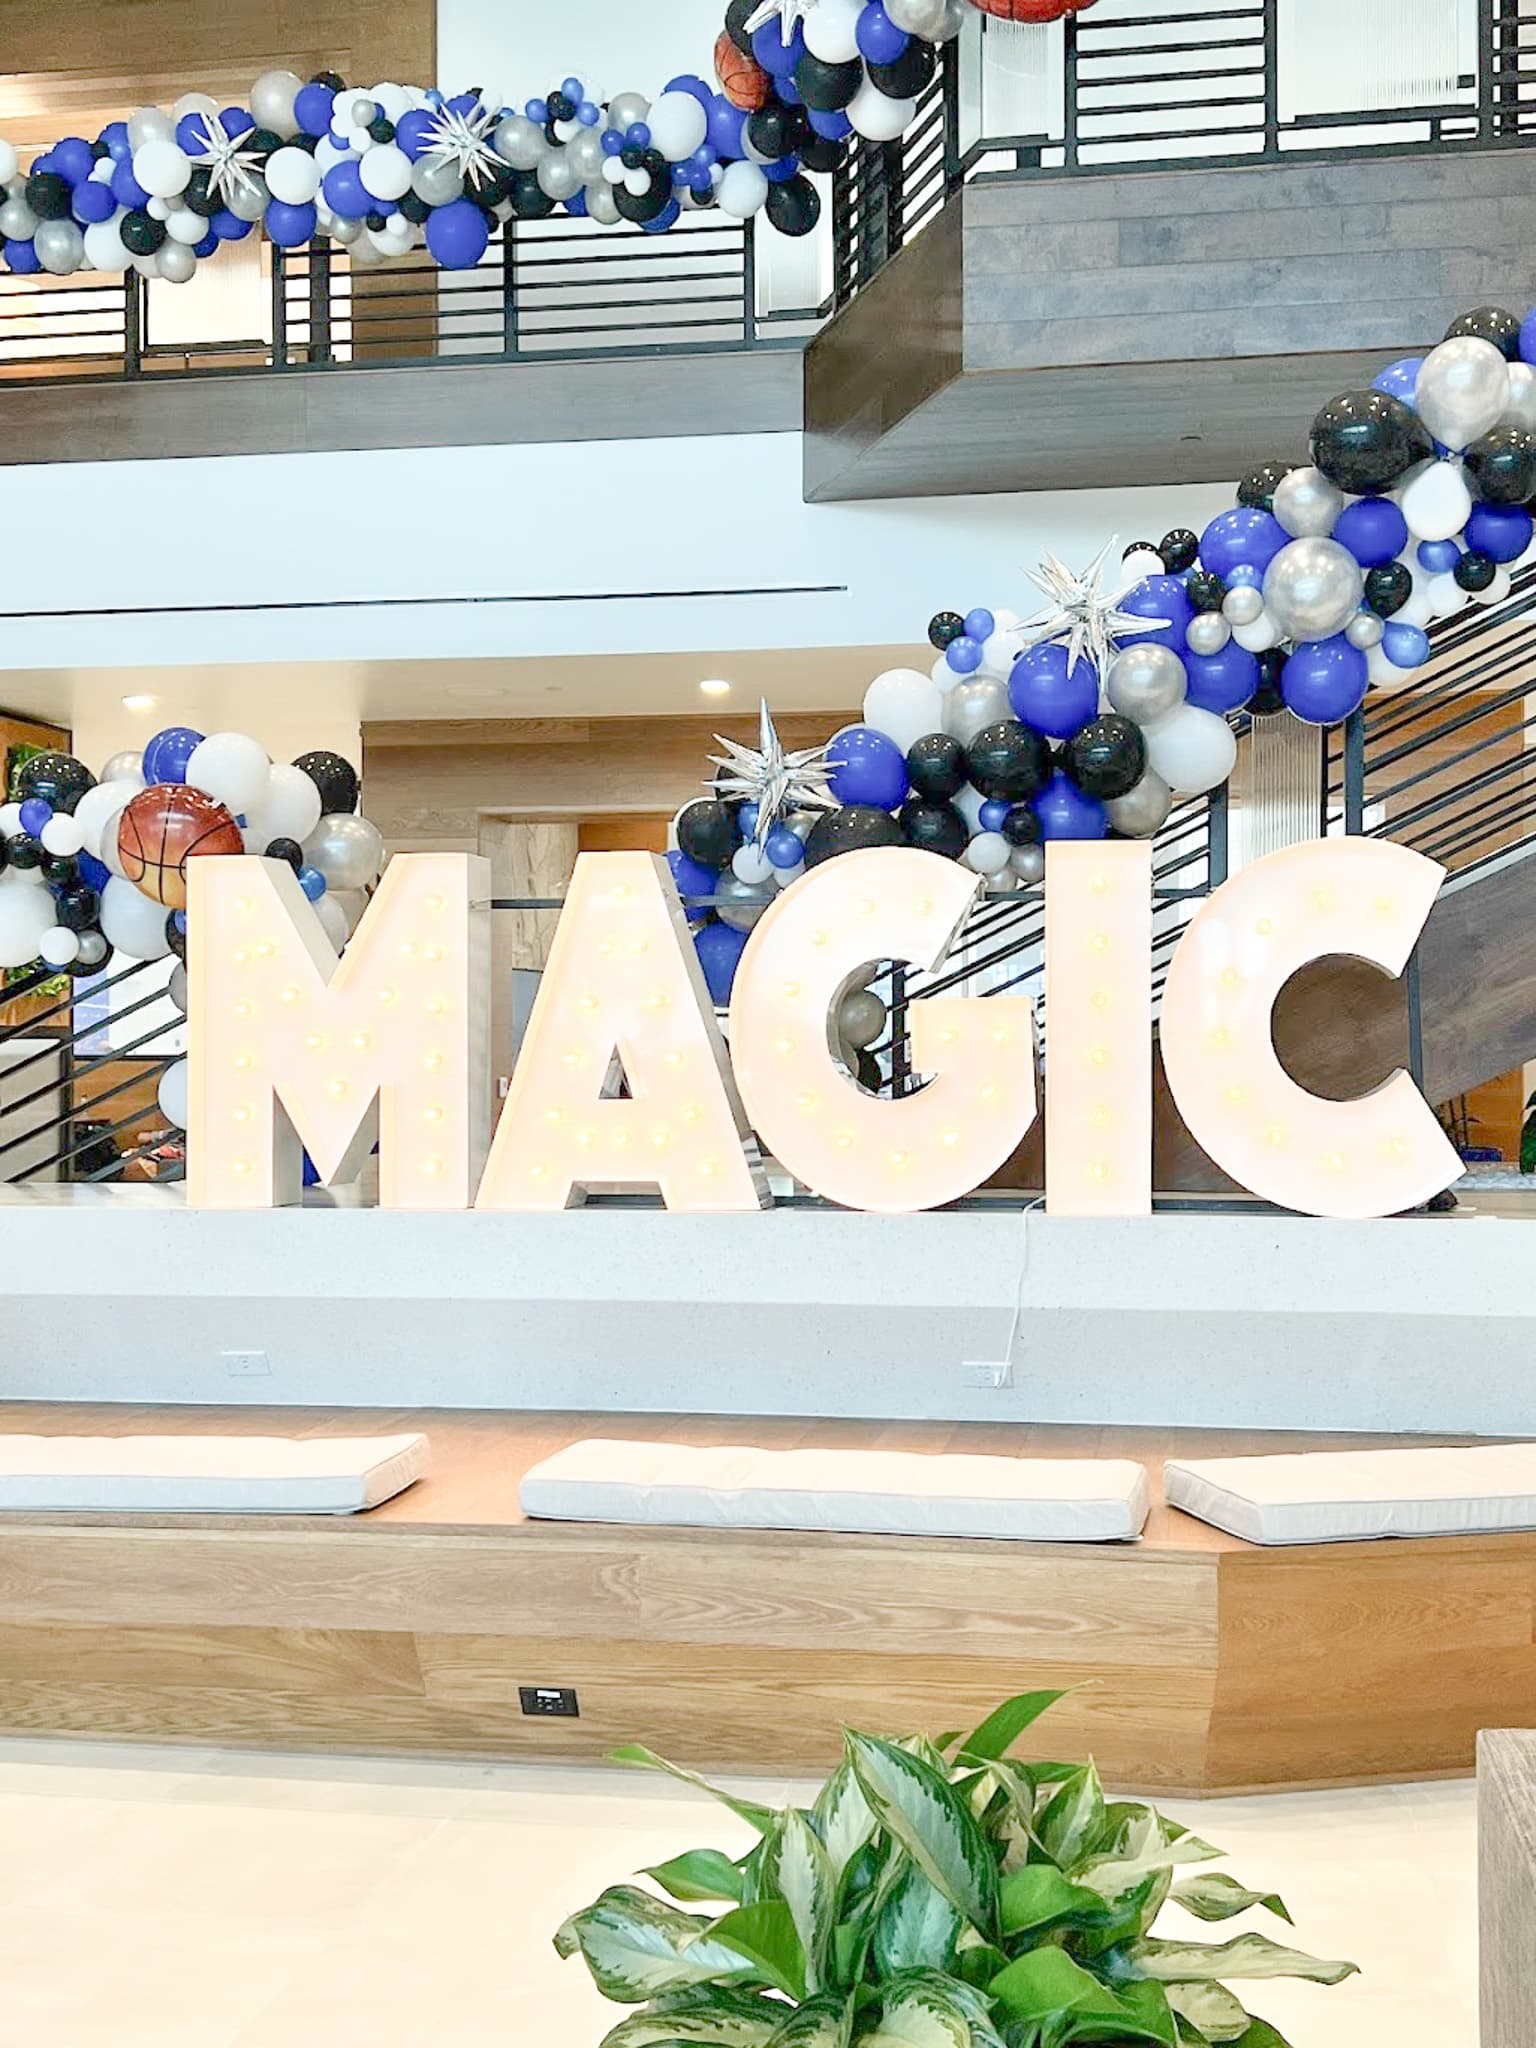 Marquee Letters spelling out MAGIC beside blue, silver, black, and white balloons